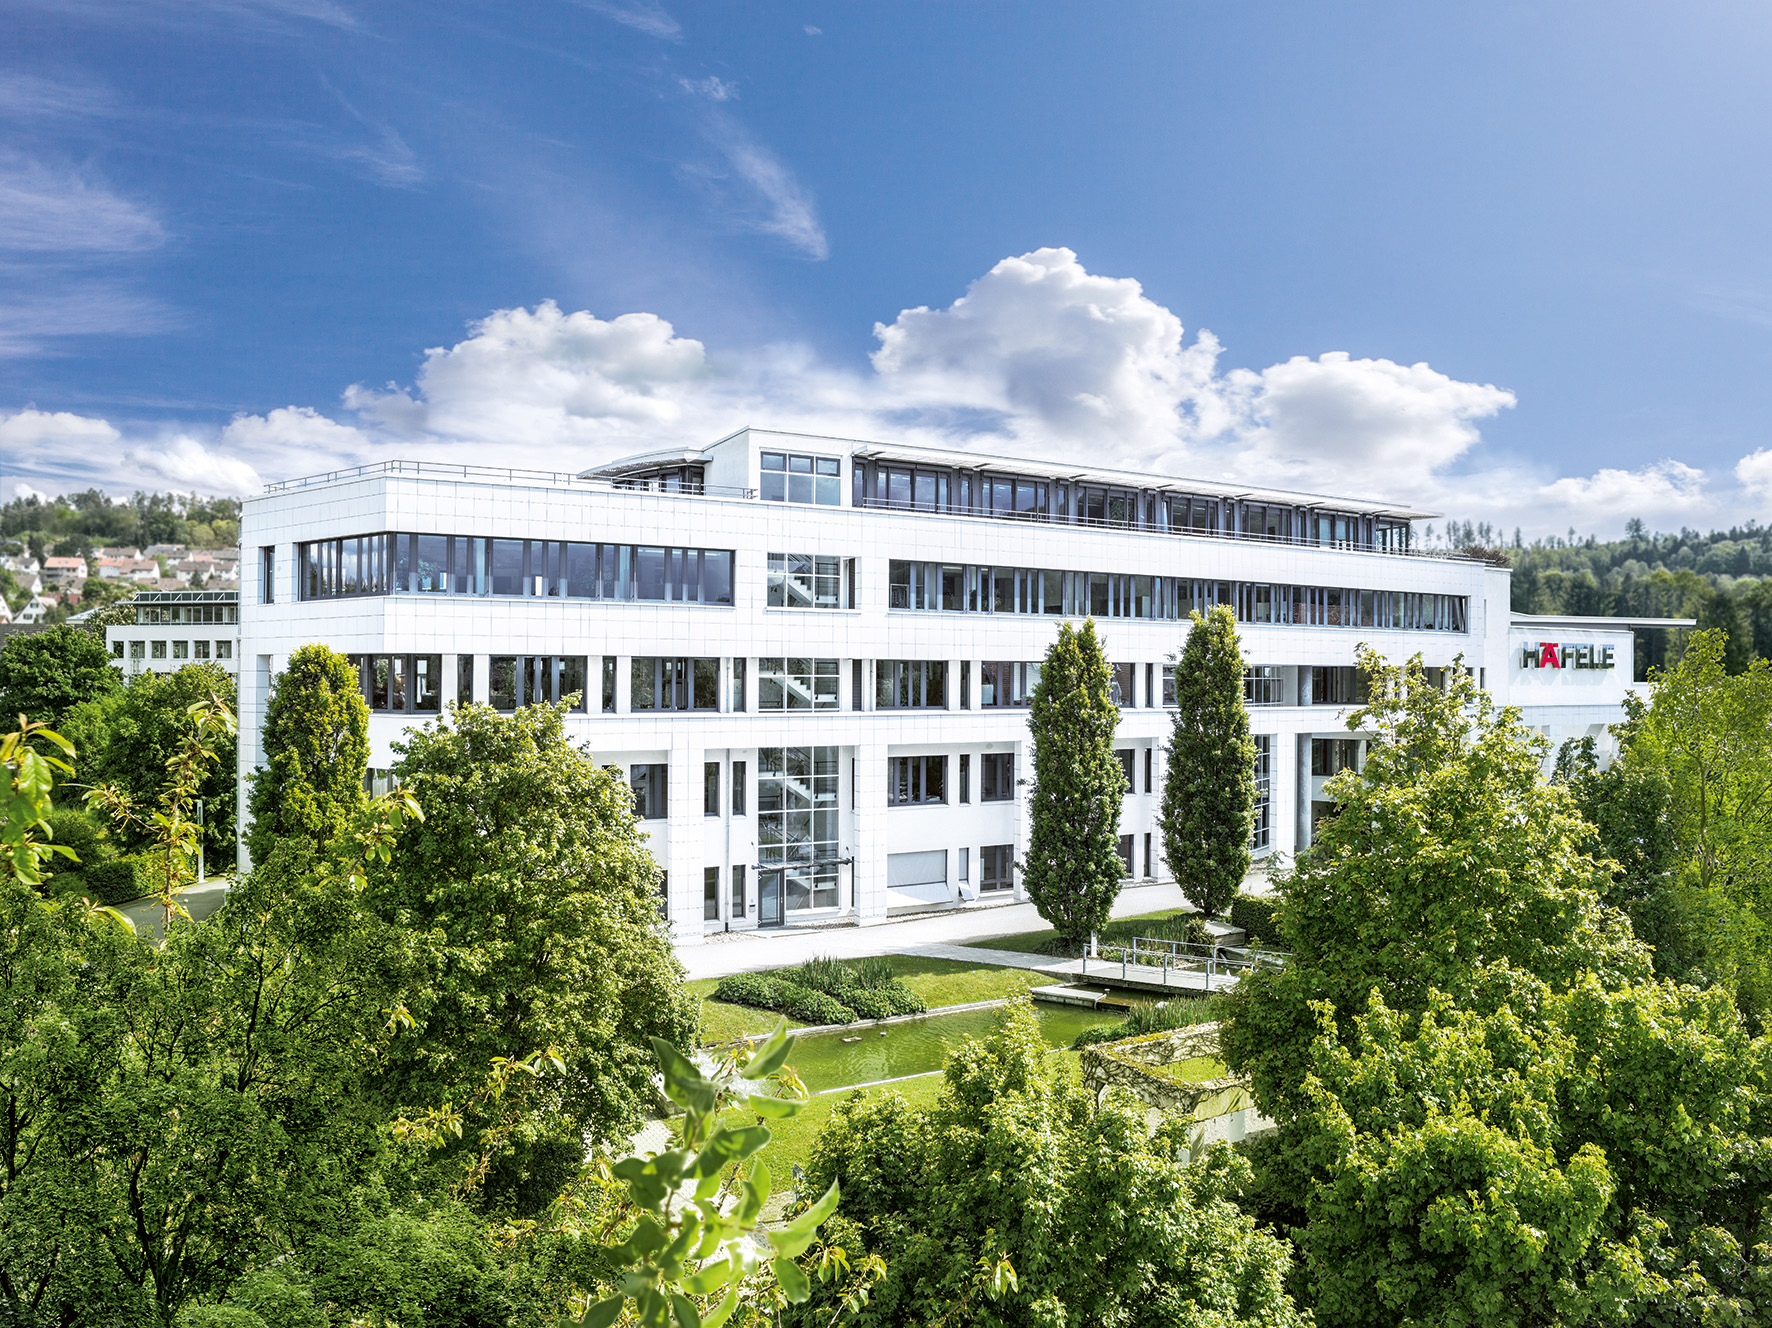 The Häfele headquarters in Nagold